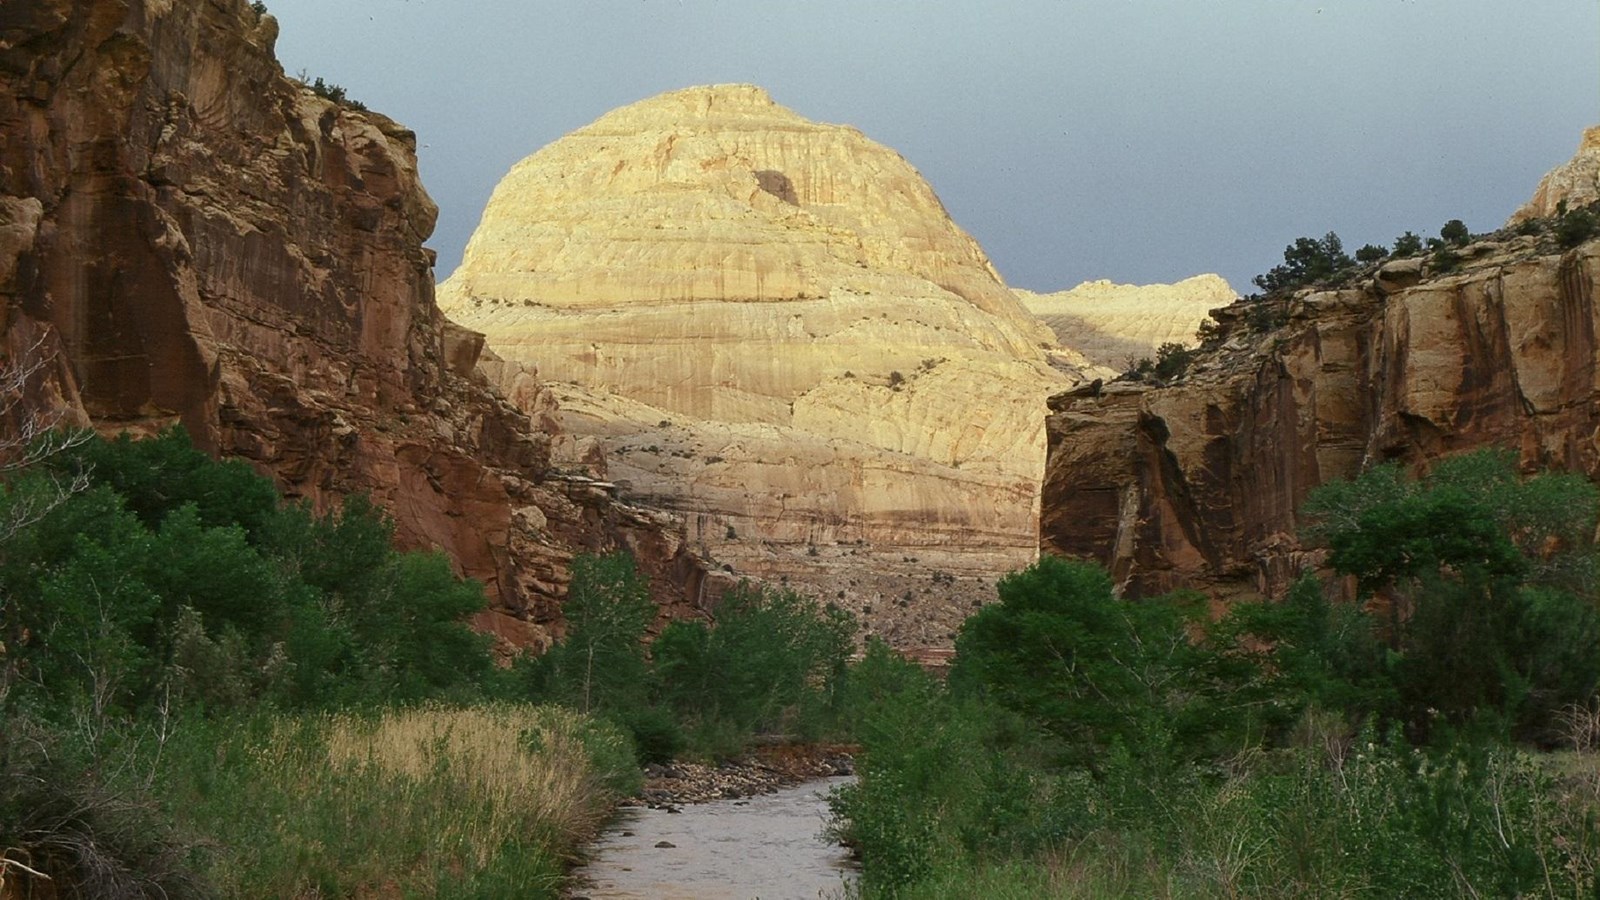 Large rounded white sandstone dome centered above a river, with green grass, red cliffs, & blue sky